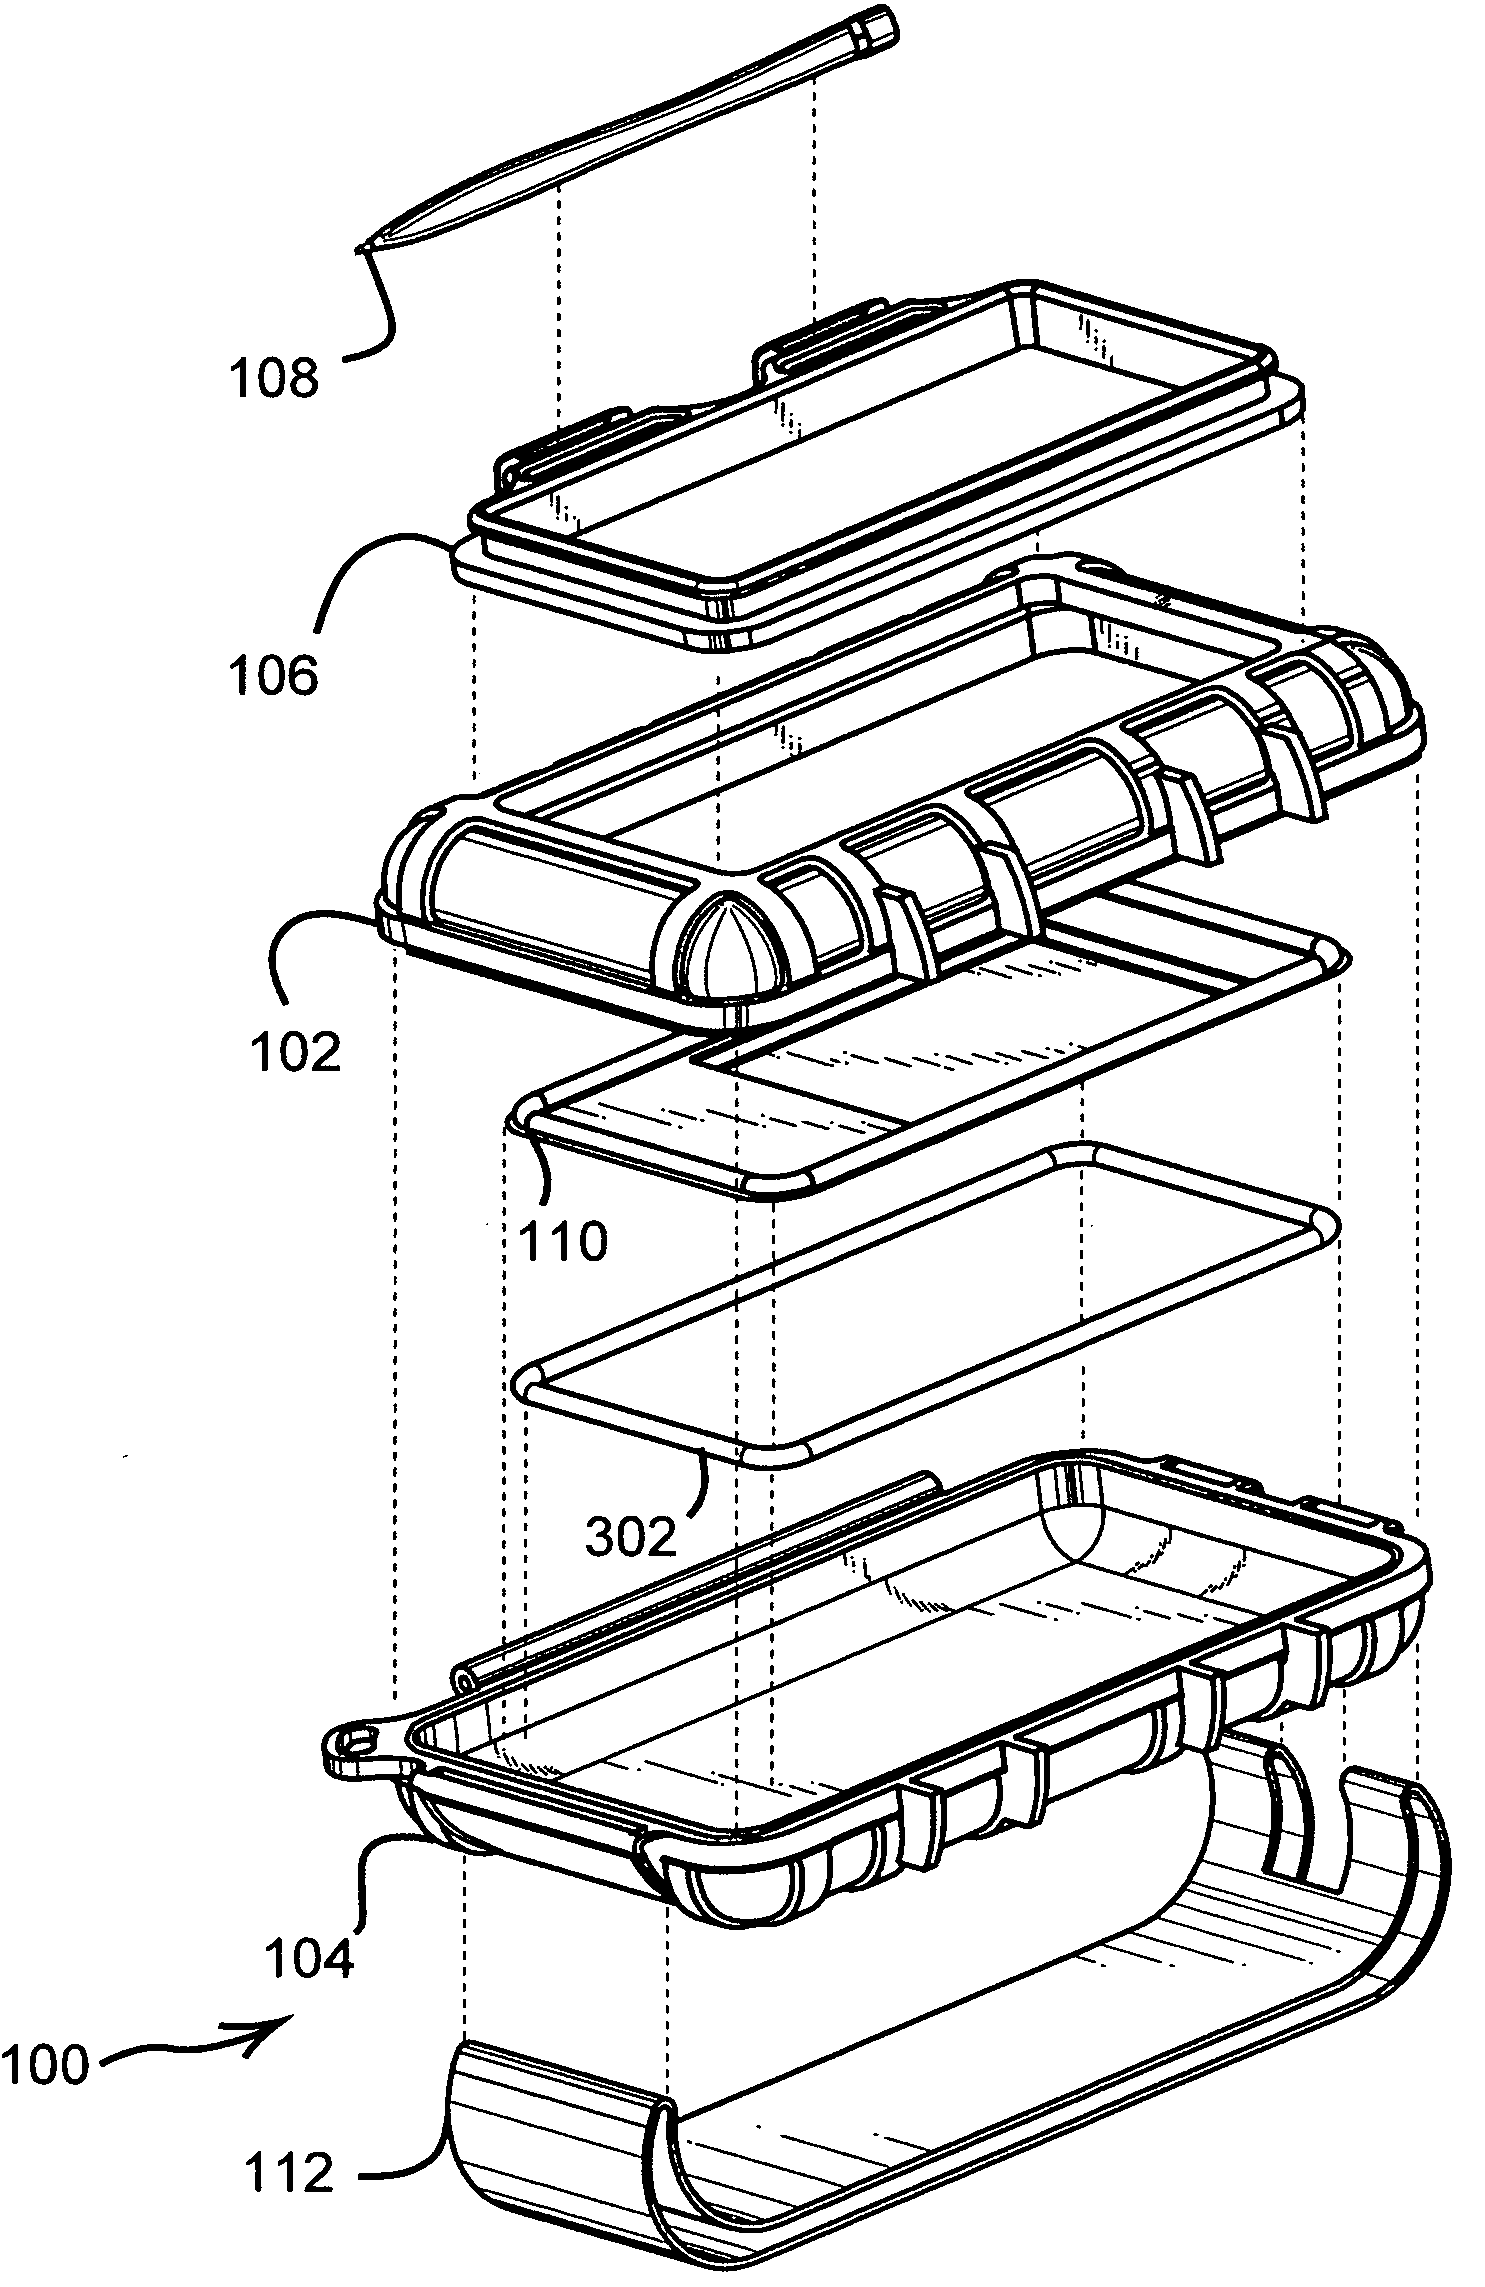 Protective membrane for touch screen device